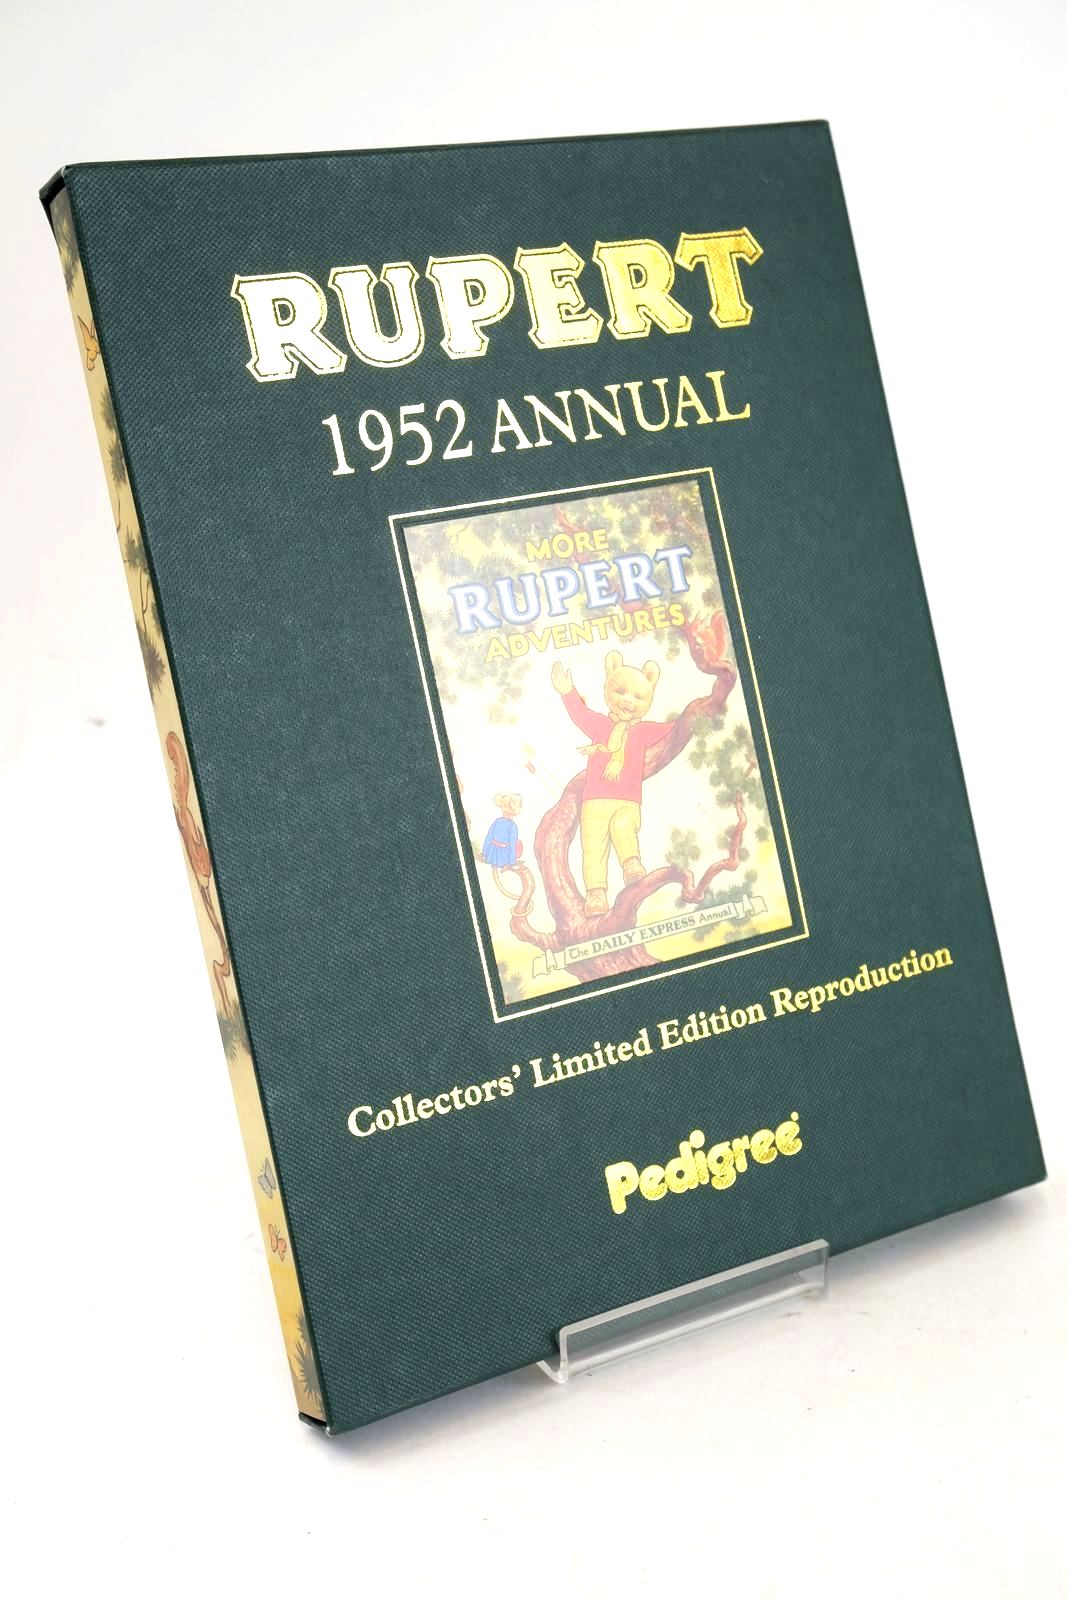 Photo of RUPERT ANNUAL 1952 (FACSIMILE) - MORE RUPERT ADVENTURES written by Bestall, Alfred illustrated by Bestall, Alfred published by Pedigree Books Limited (STOCK CODE: 1325827)  for sale by Stella & Rose's Books